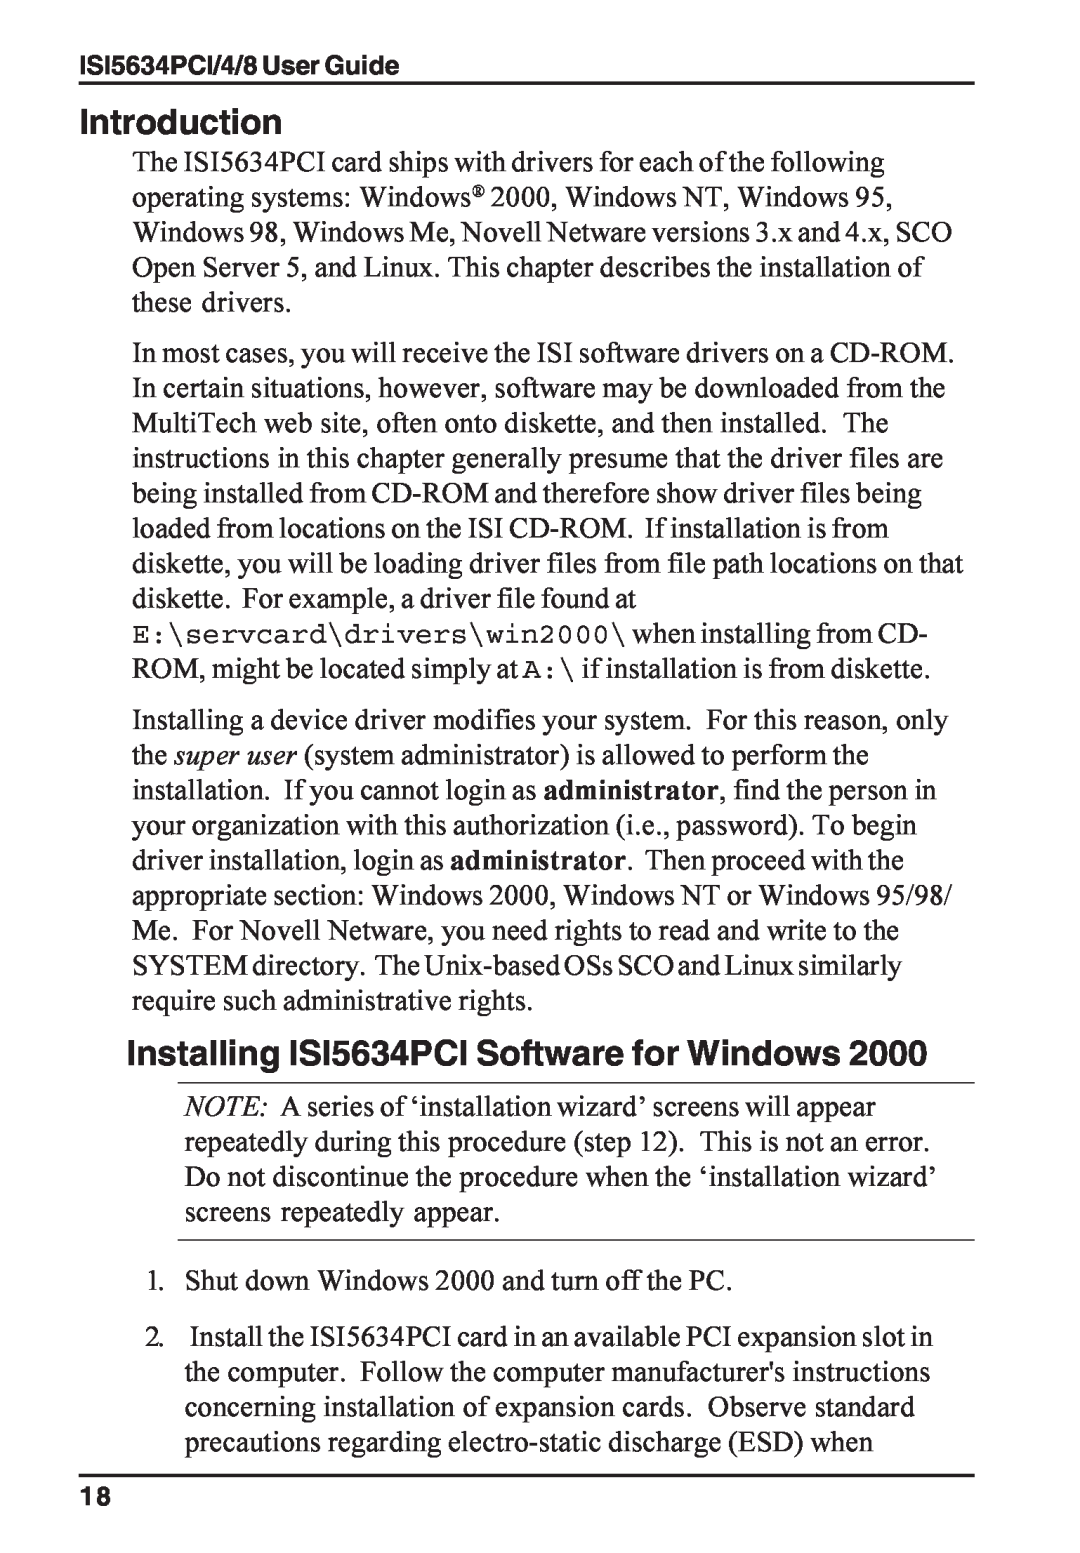 Multi-Tech Systems ISI5634PCI/4/8 manual Installing ISI5634PCI Software for Windows, Introduction 